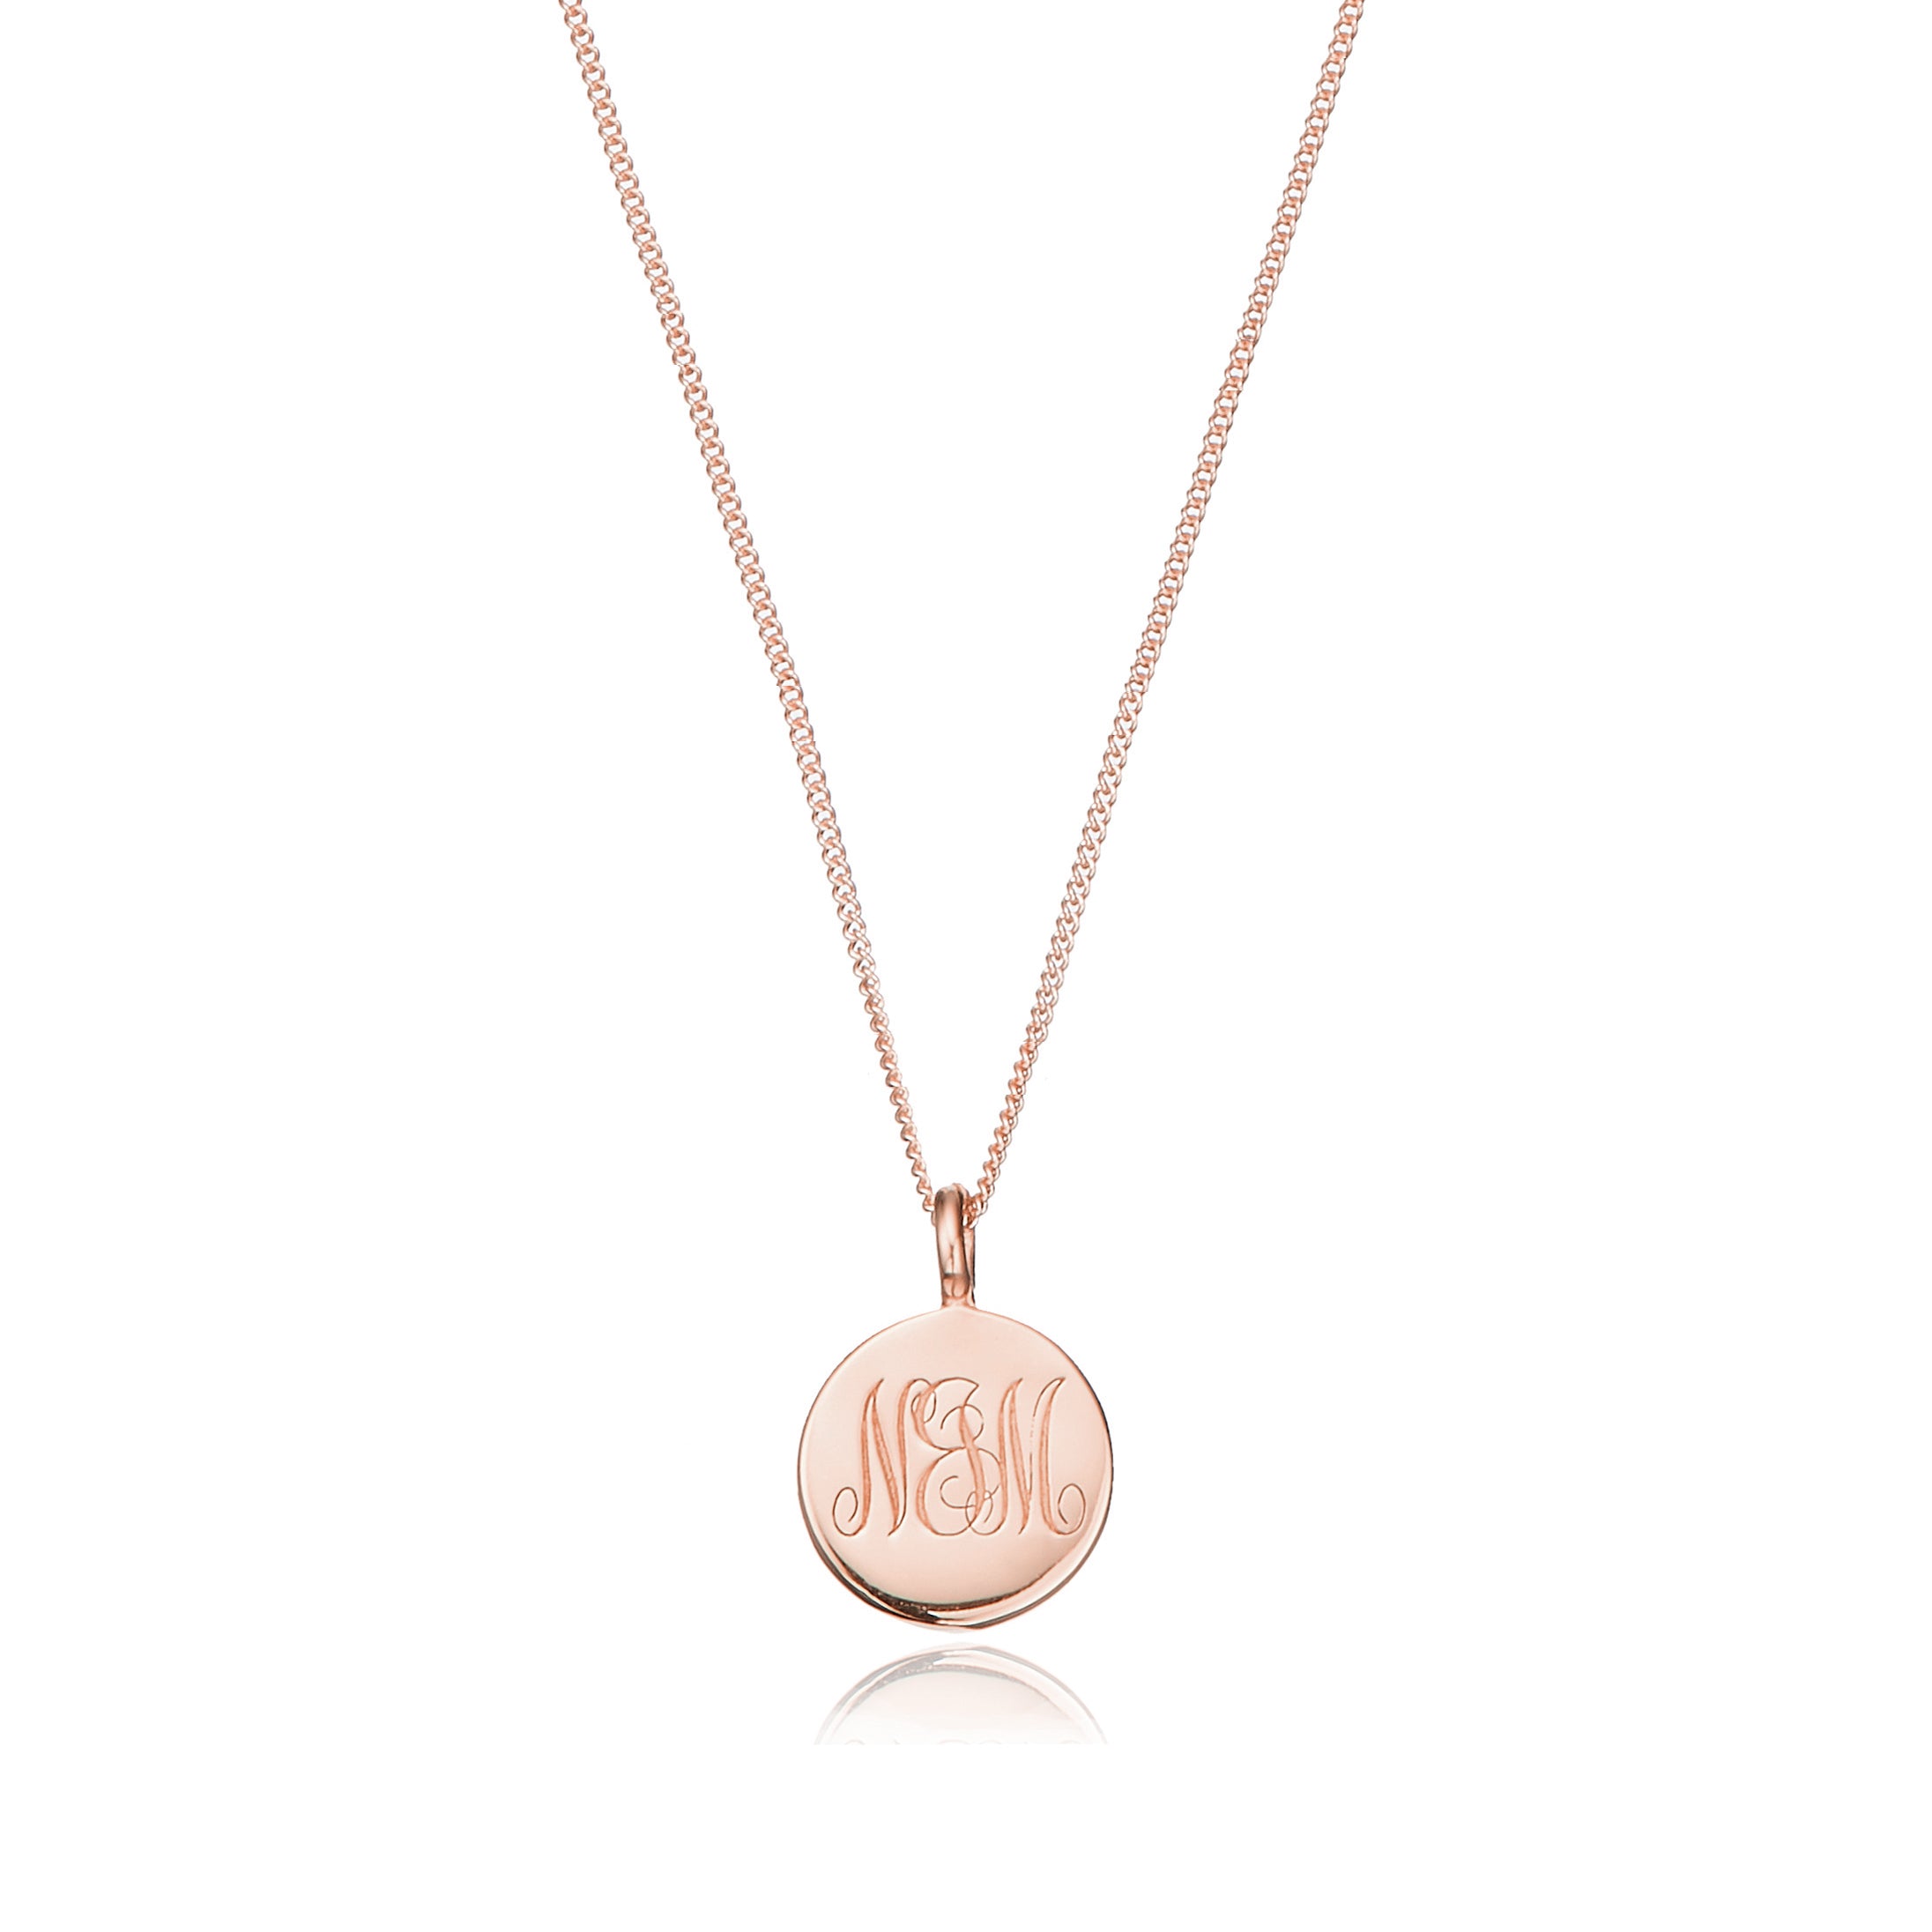 Rose gold large engraved disc necklace with NM engraved on a white background